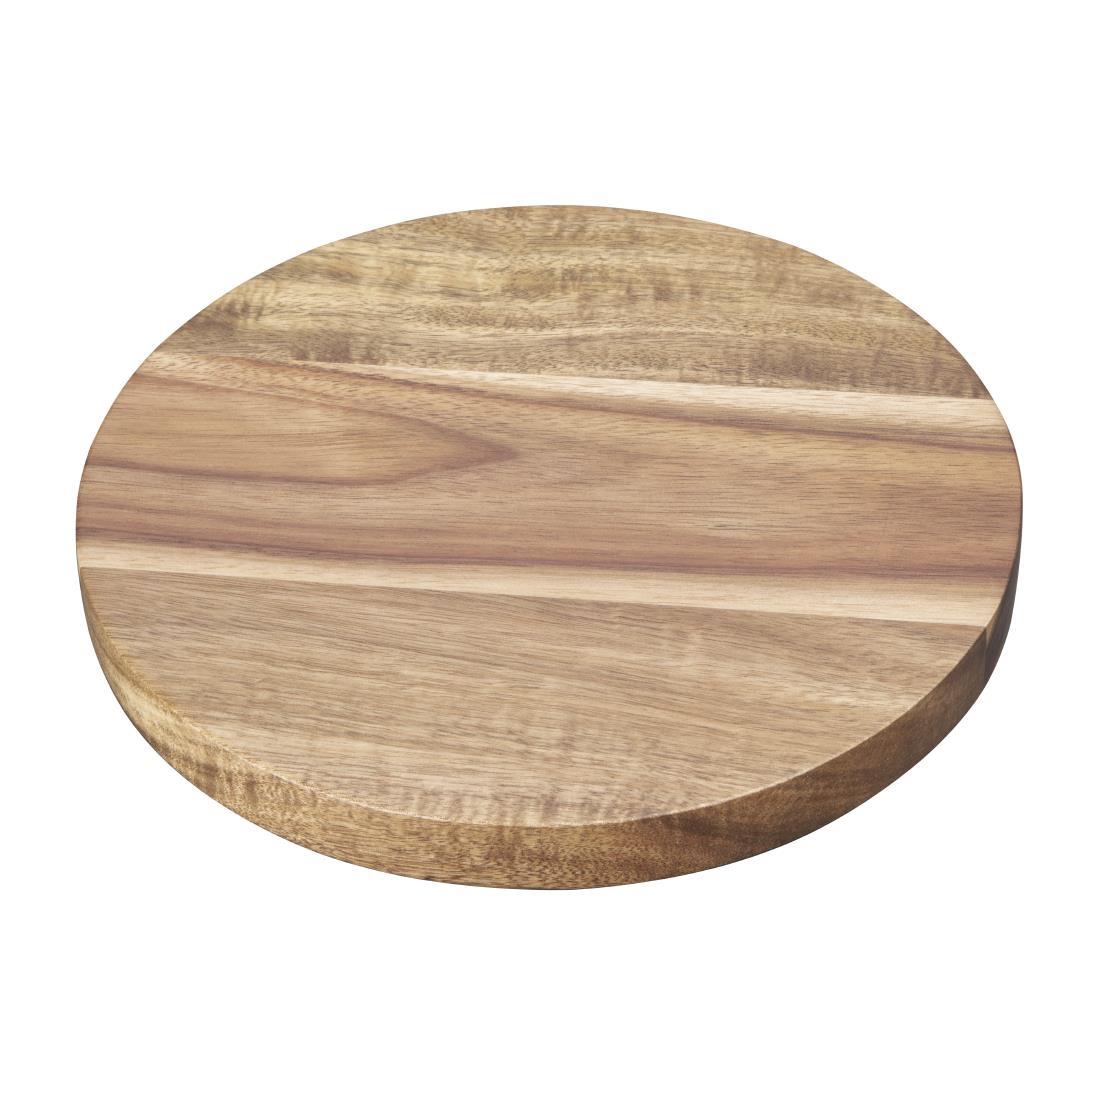 Olympia Acacia Round Plates 200(D)mm - FT611  - 4